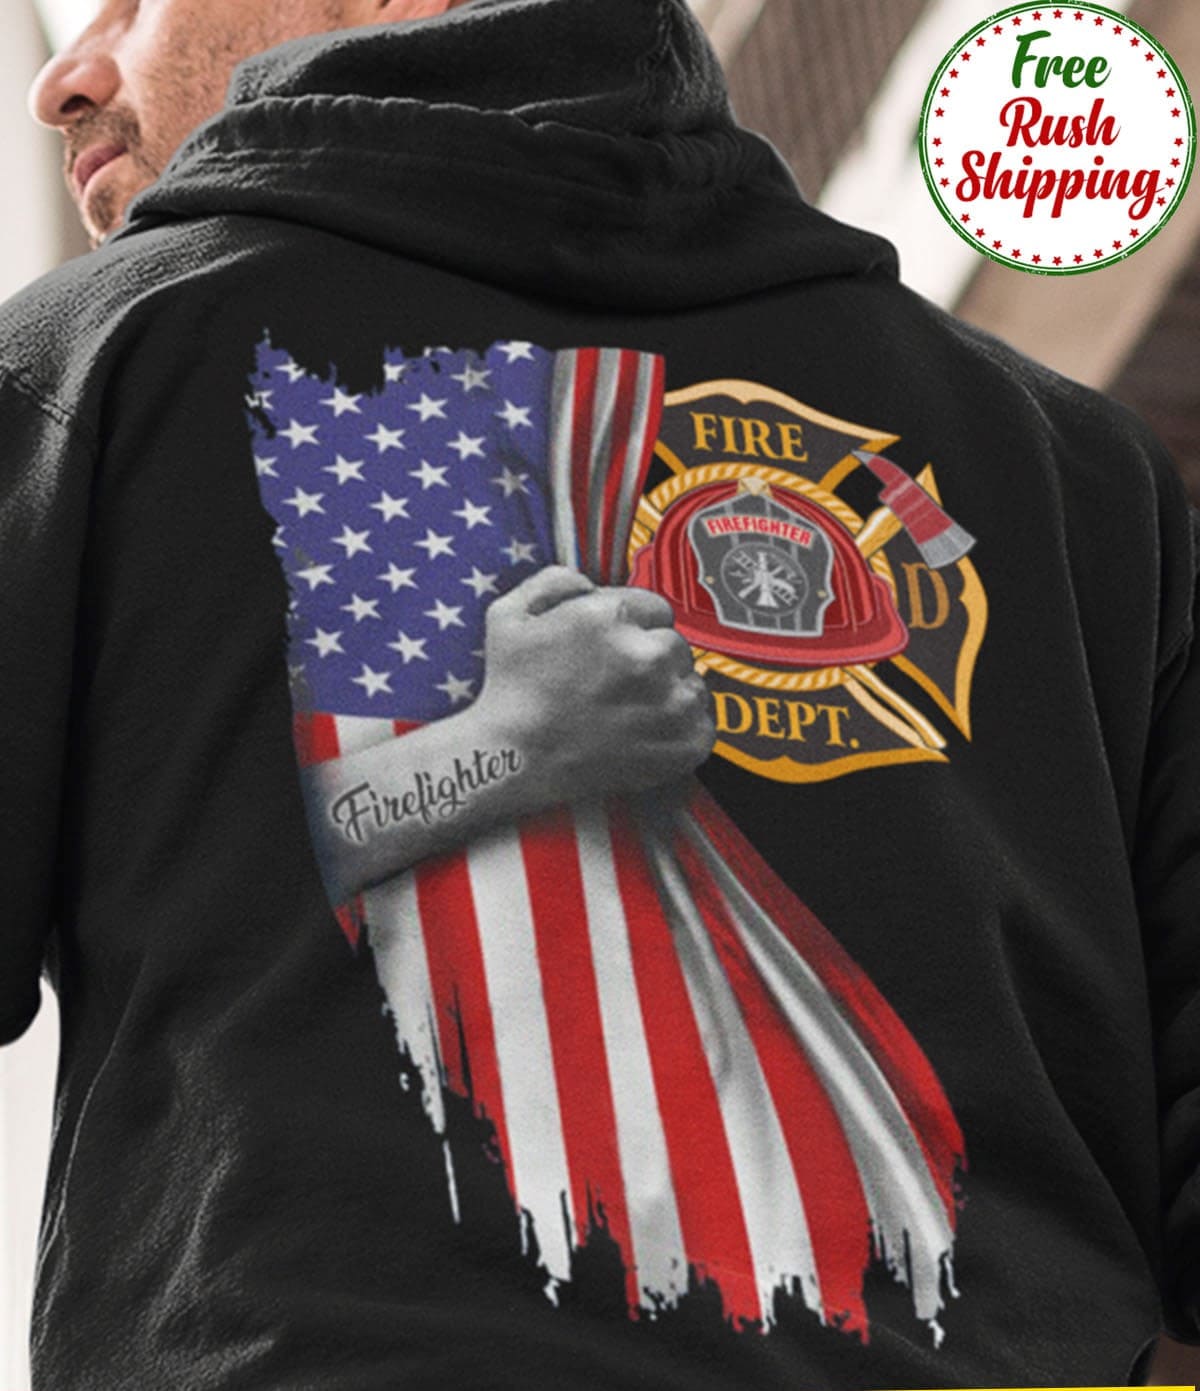 Gift for Firefighter - American firefighter, proud to be firefighter